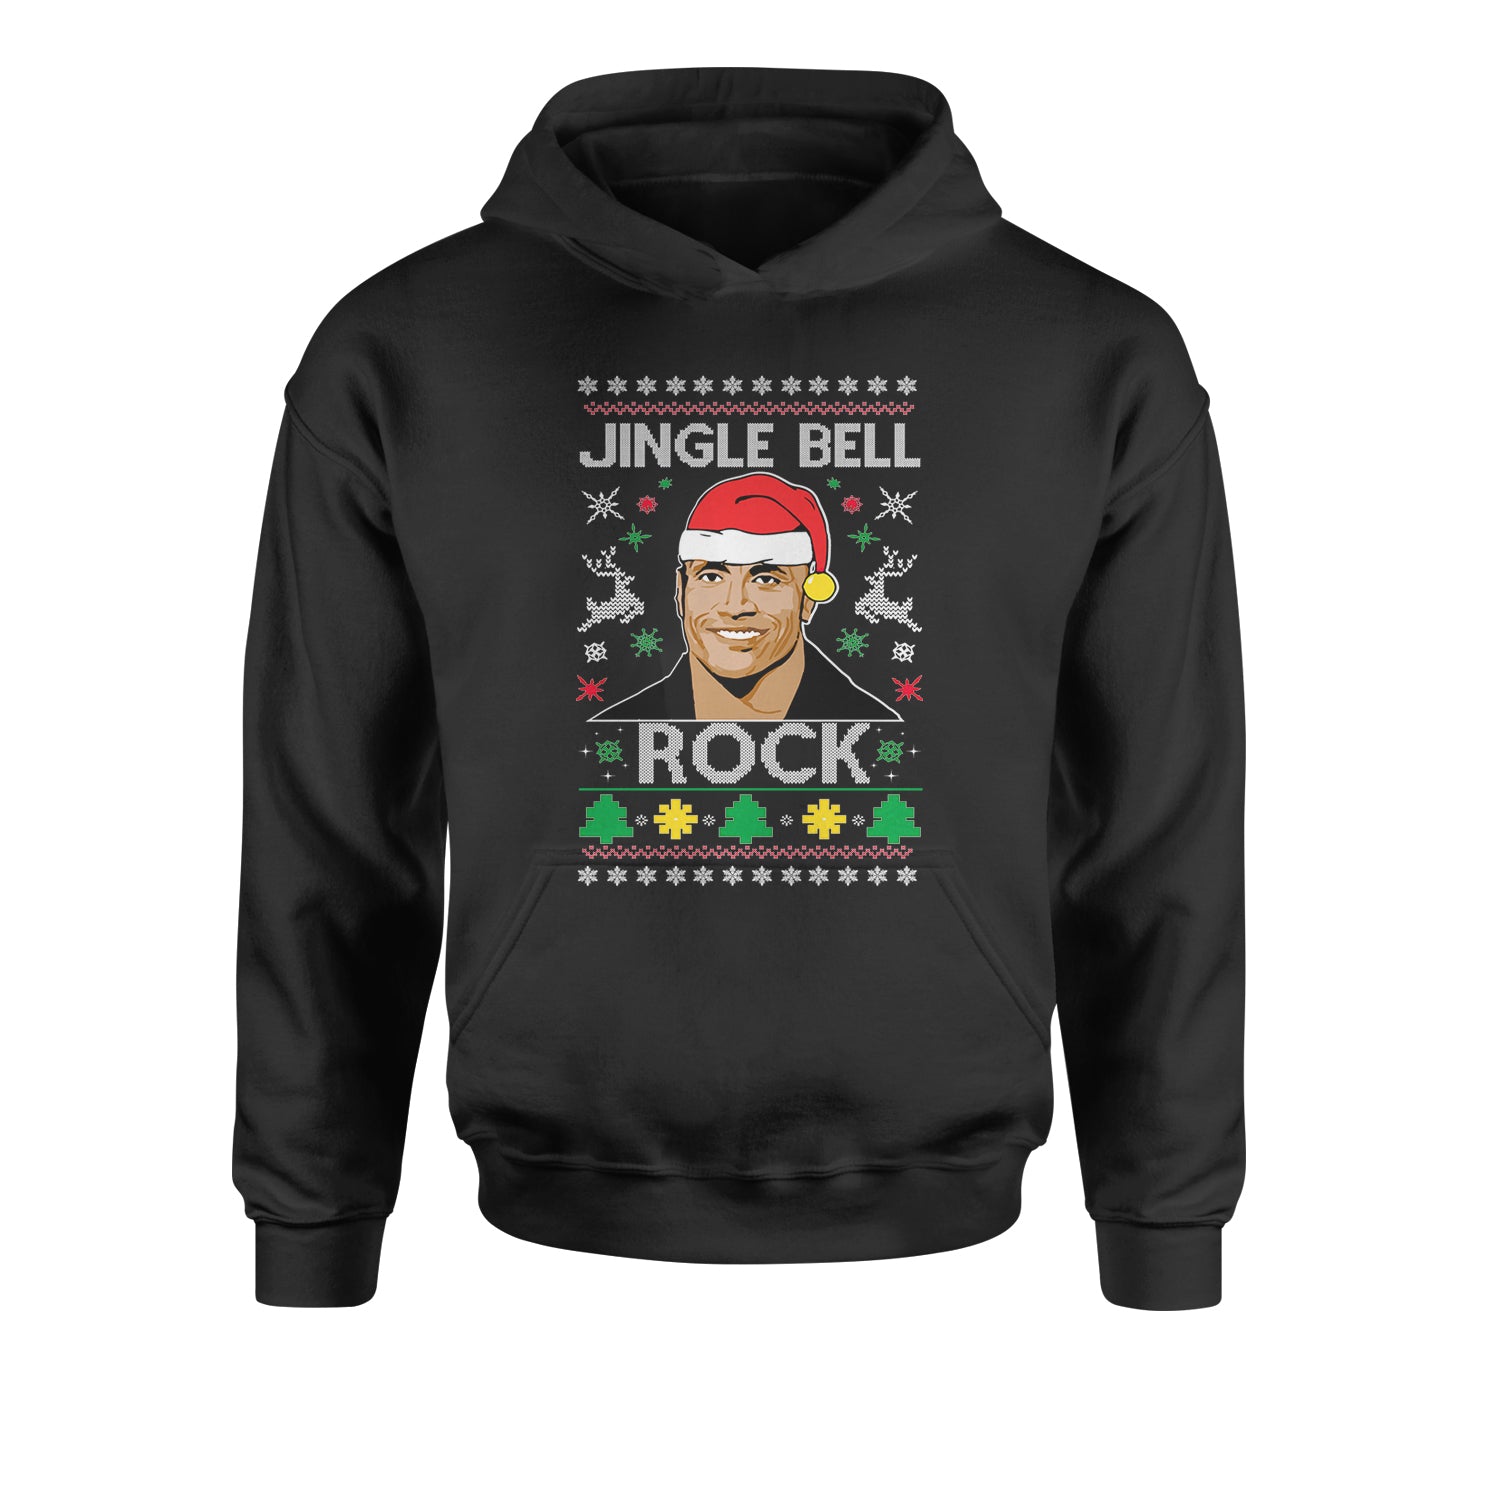 Jingle Bell Rock Ugly Christmas Youth-Sized Hoodie 2018, champ, Christmas, dwayne, johnson, peoples, rock, Sweatshirts, the, Ugly by Expression Tees